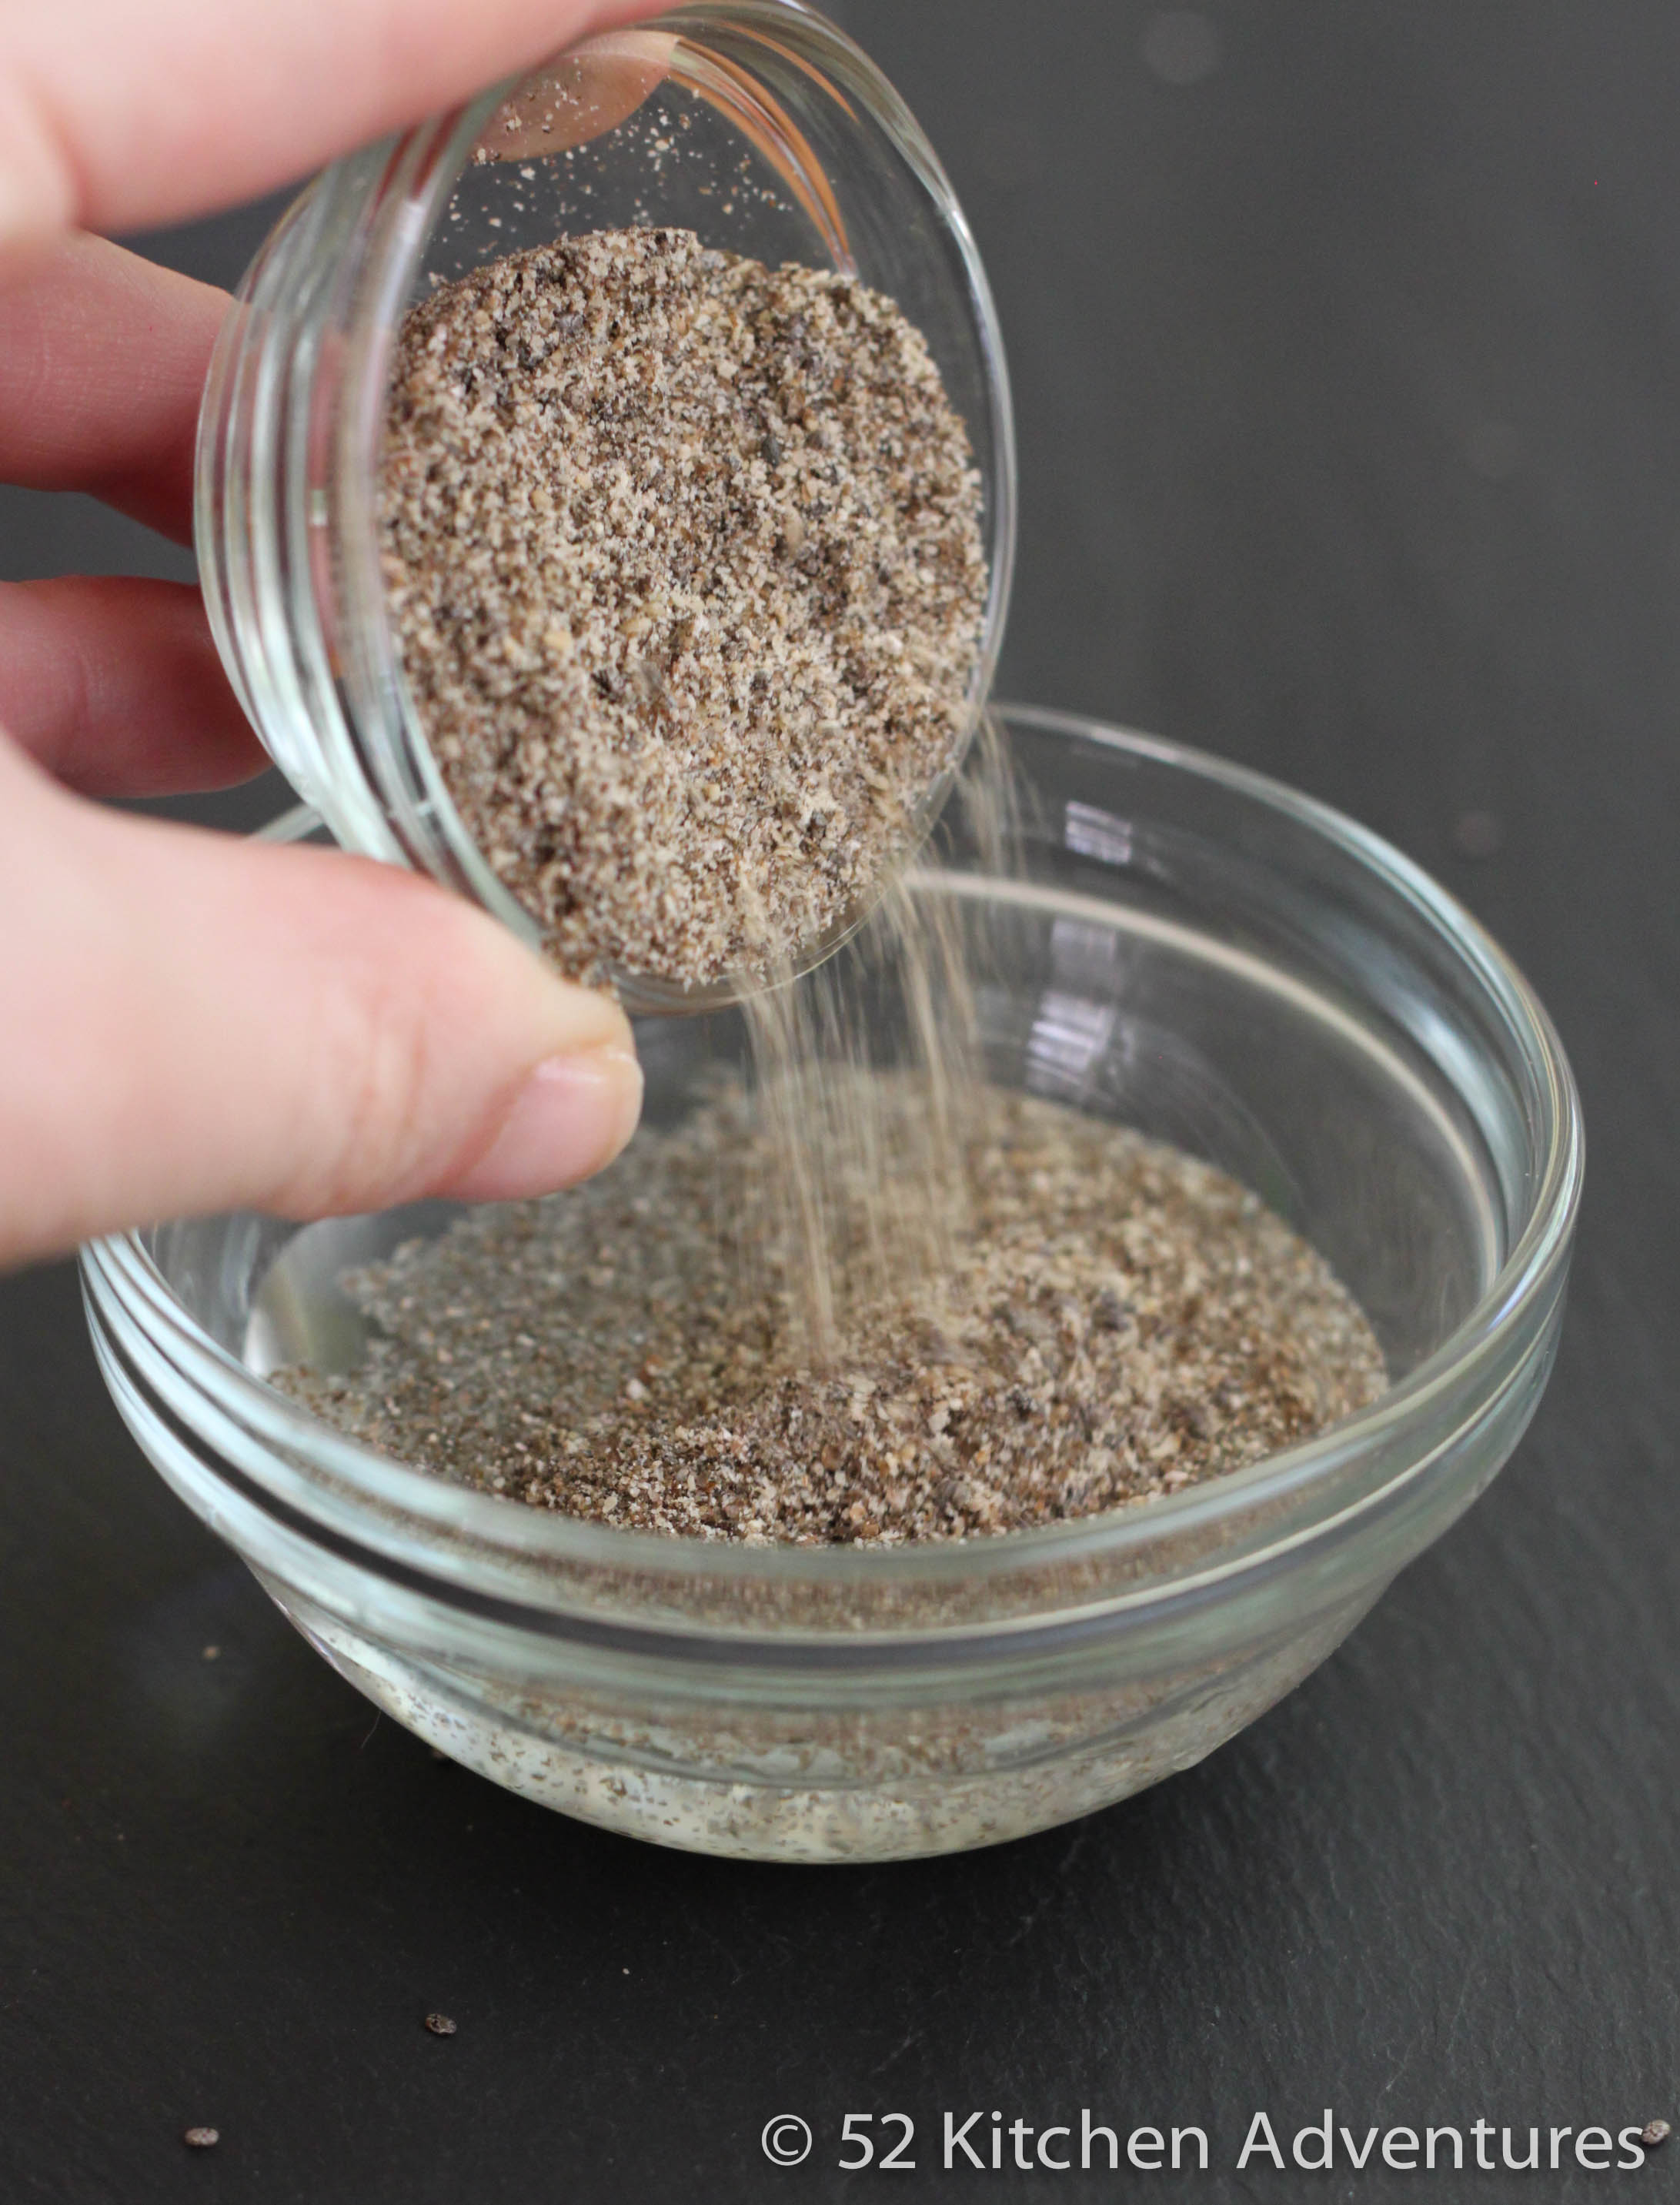 Making egg replacer with chia seeds